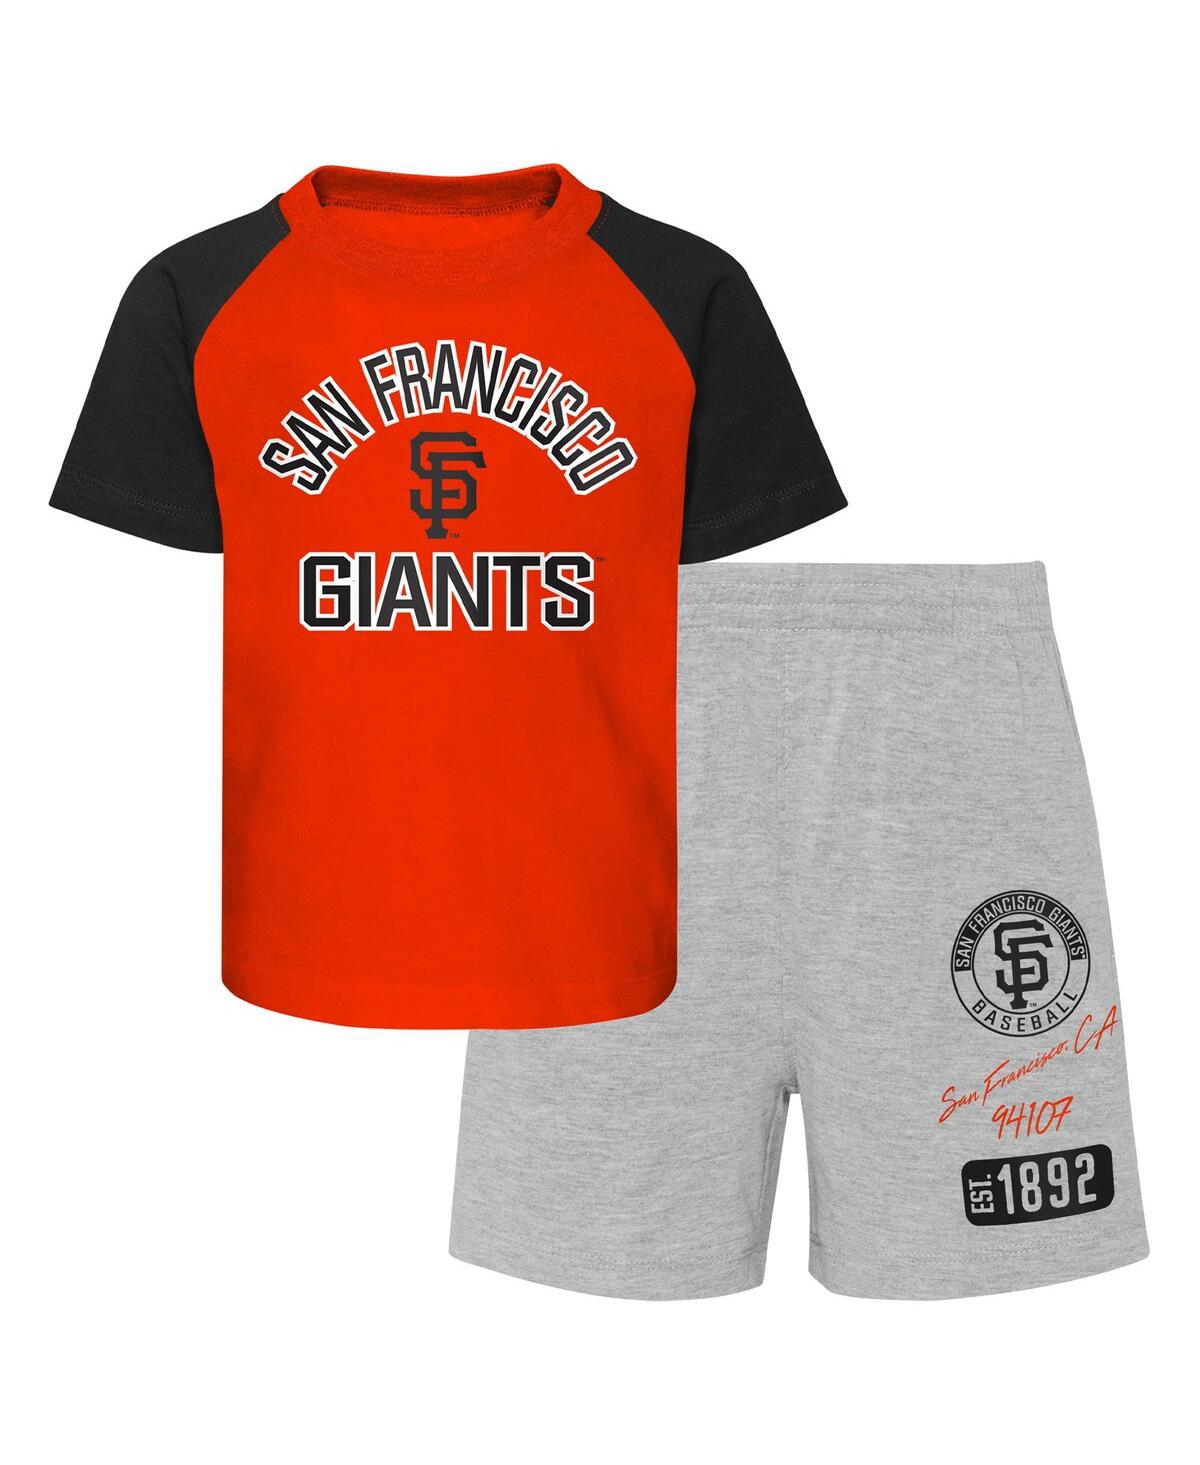 Outerstuff Babies' Infant Boys And Girls Orange And Heather Gray San Francisco Giants Ground Out Baller Raglan T-shirt  In Orange,heather Gray